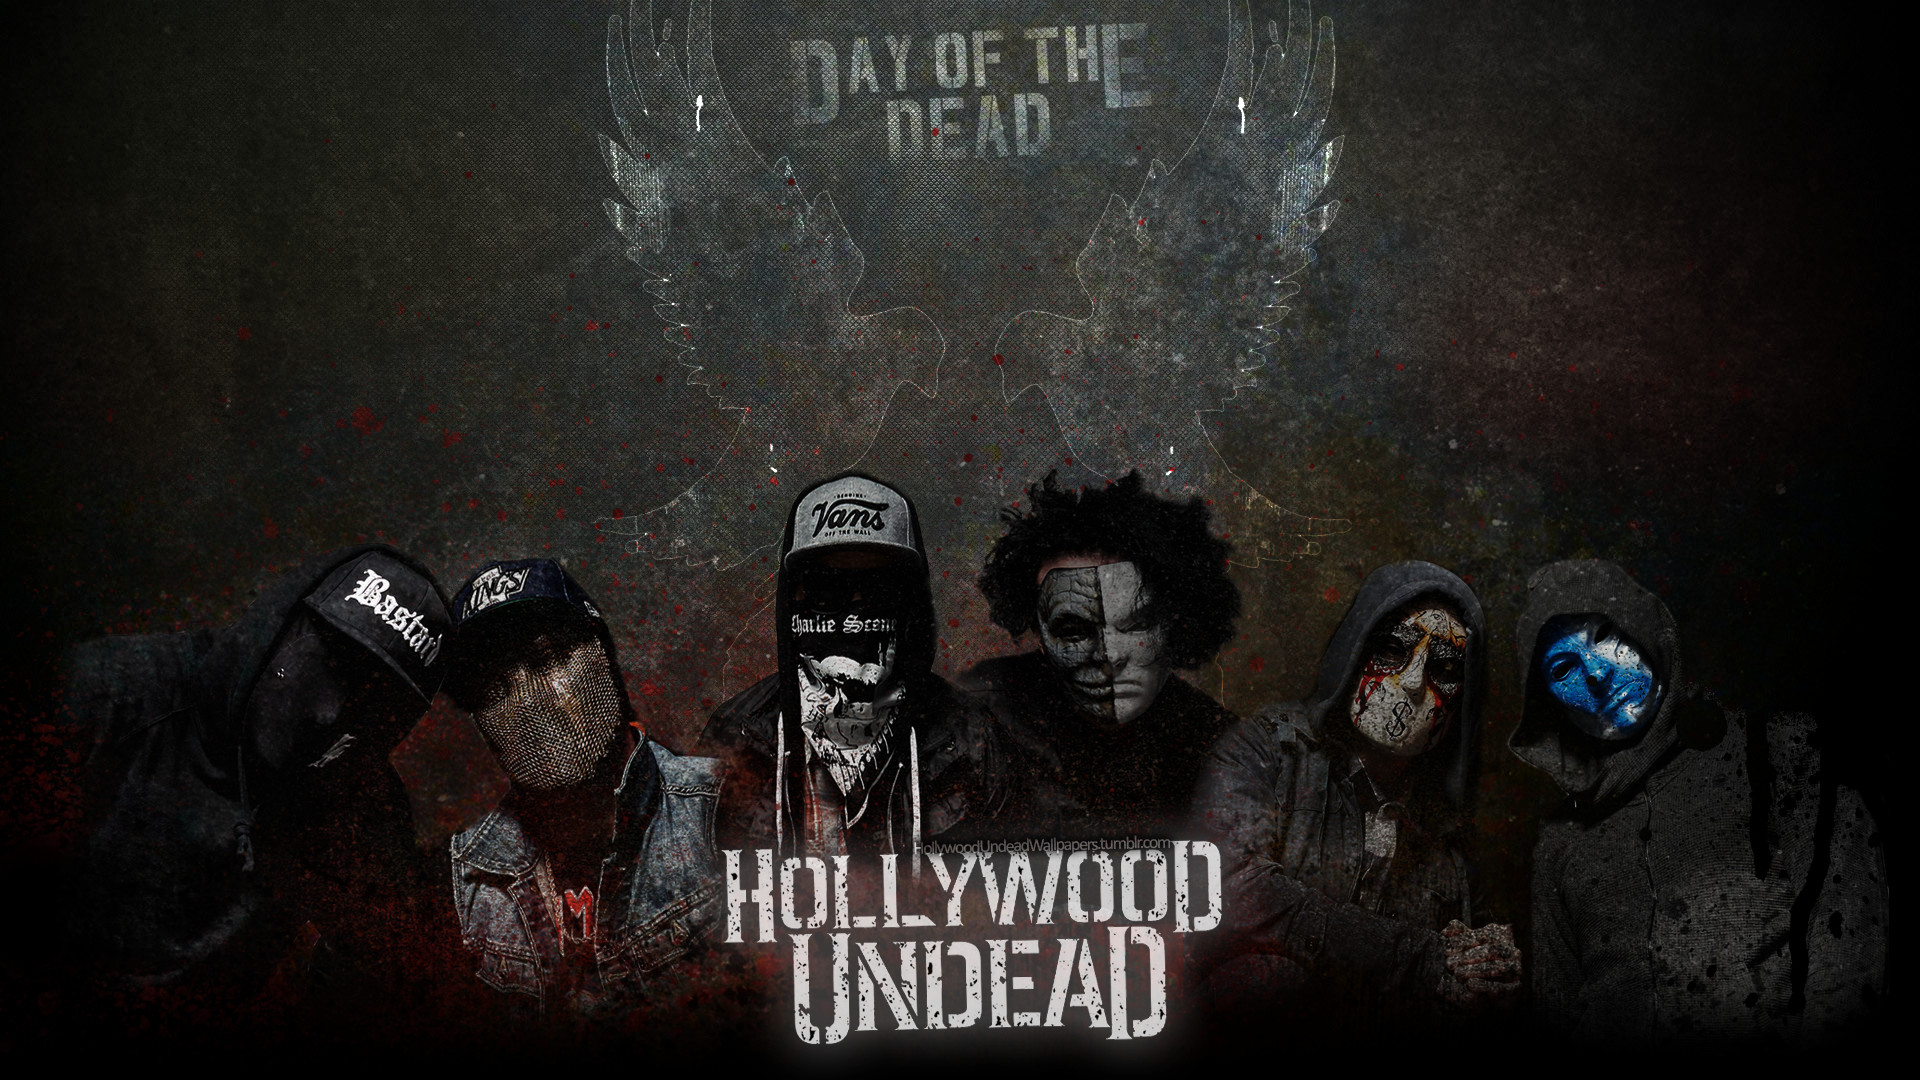 1920x1080 ... Hollywood Undead - Day of the Dead WP (NEW MASKS)! by emirulug